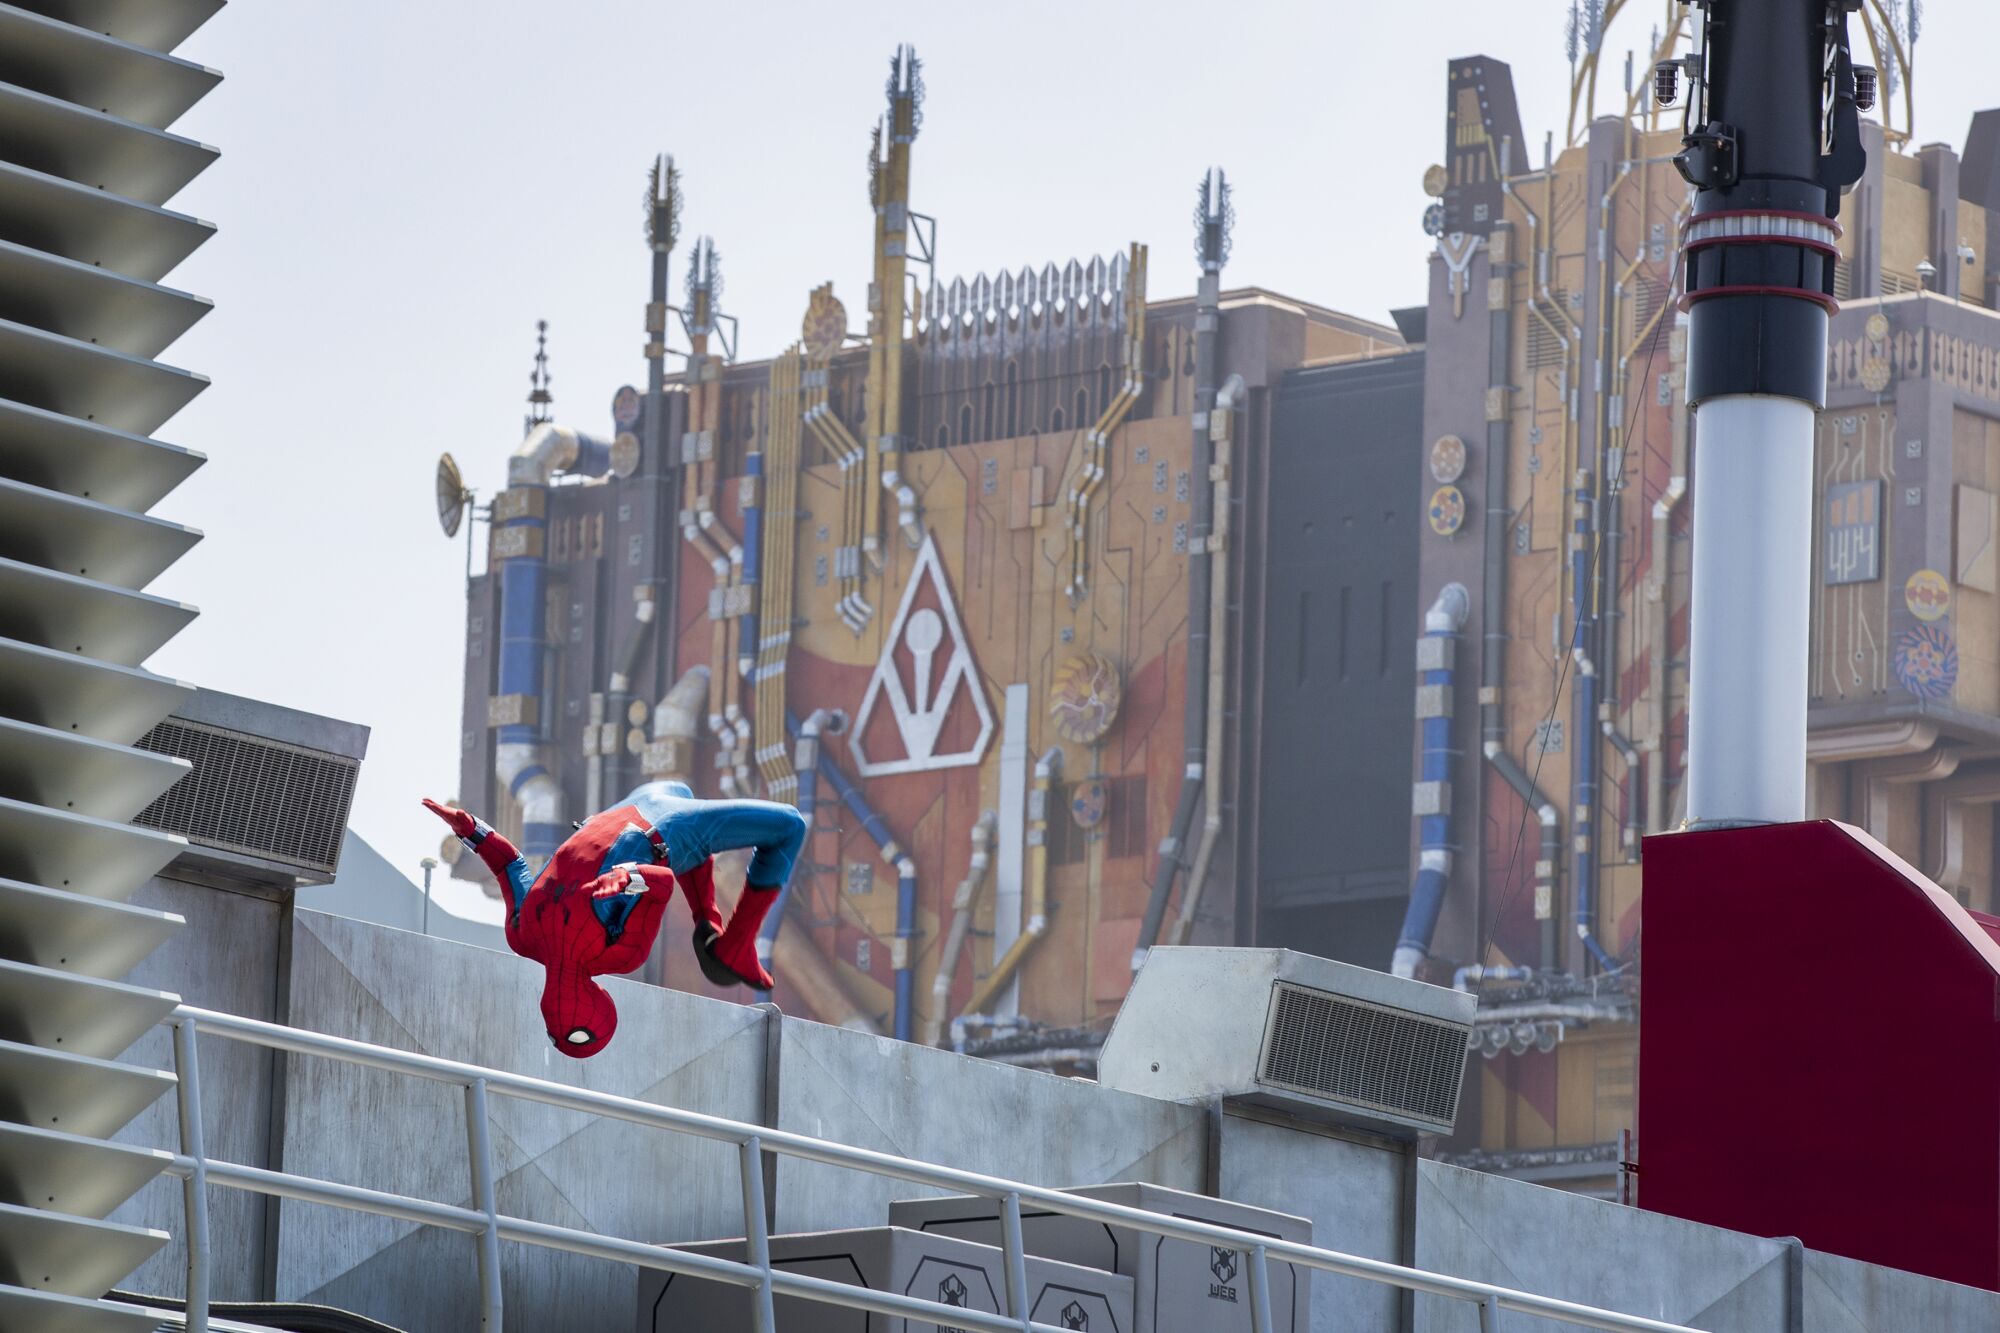 Spider-Man does a backflip